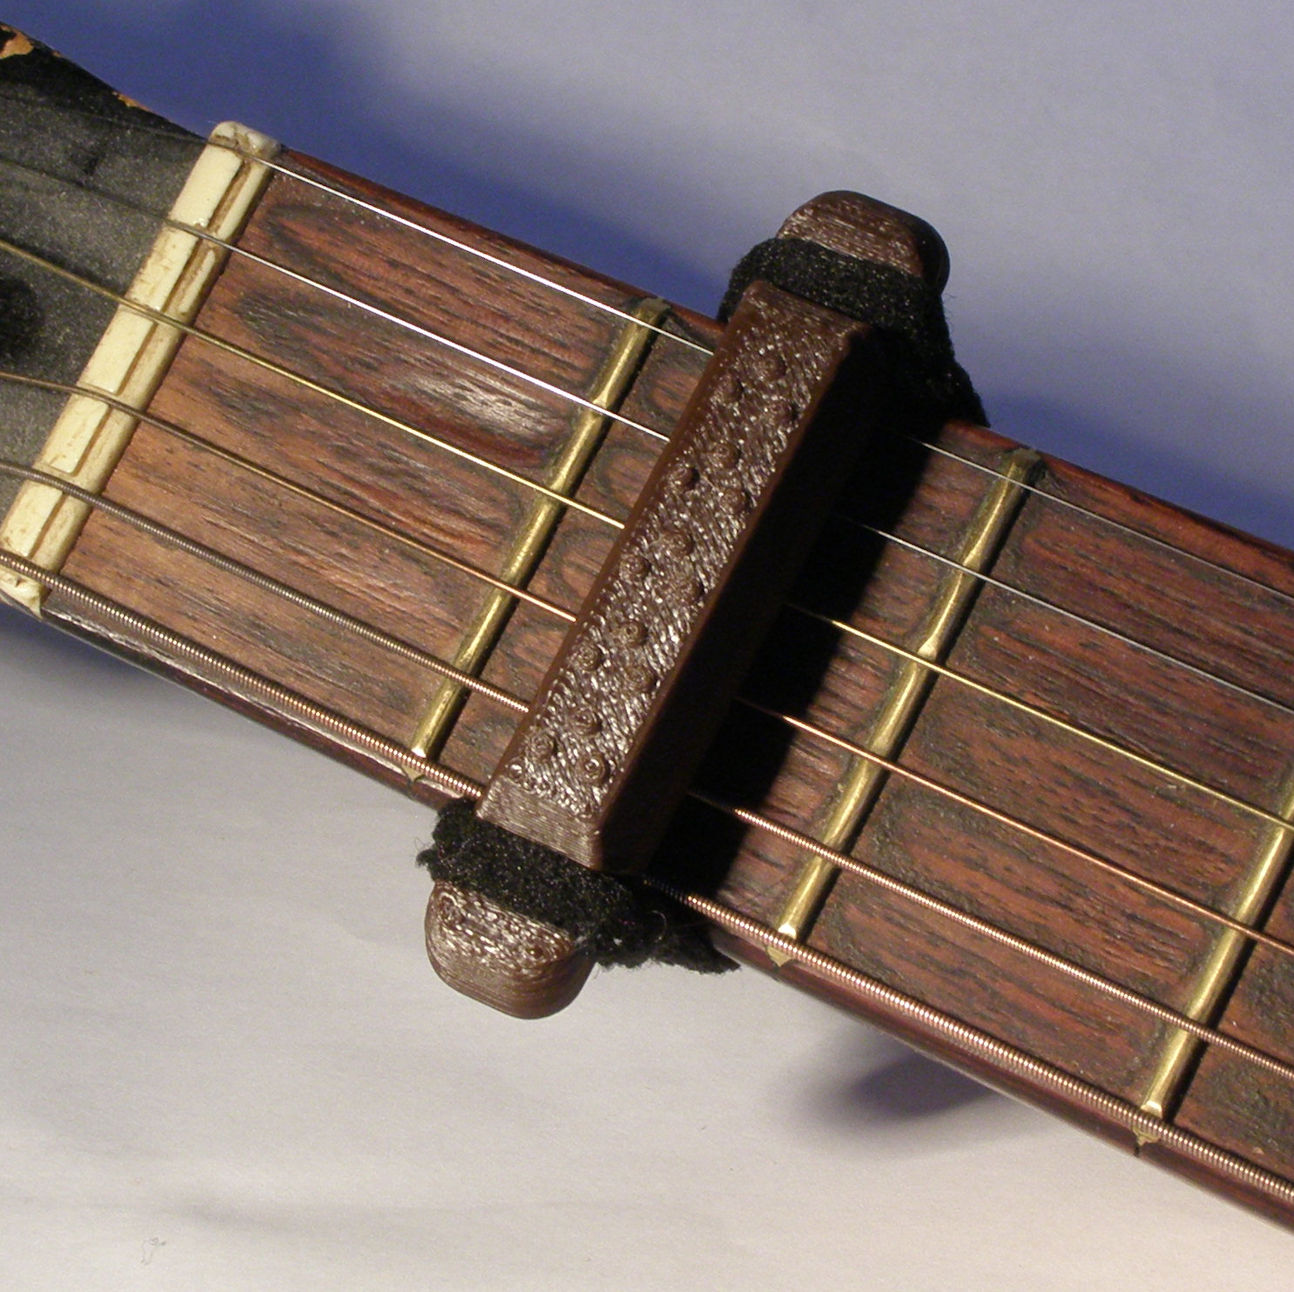 3D Printed Guitar Capo - Project Note